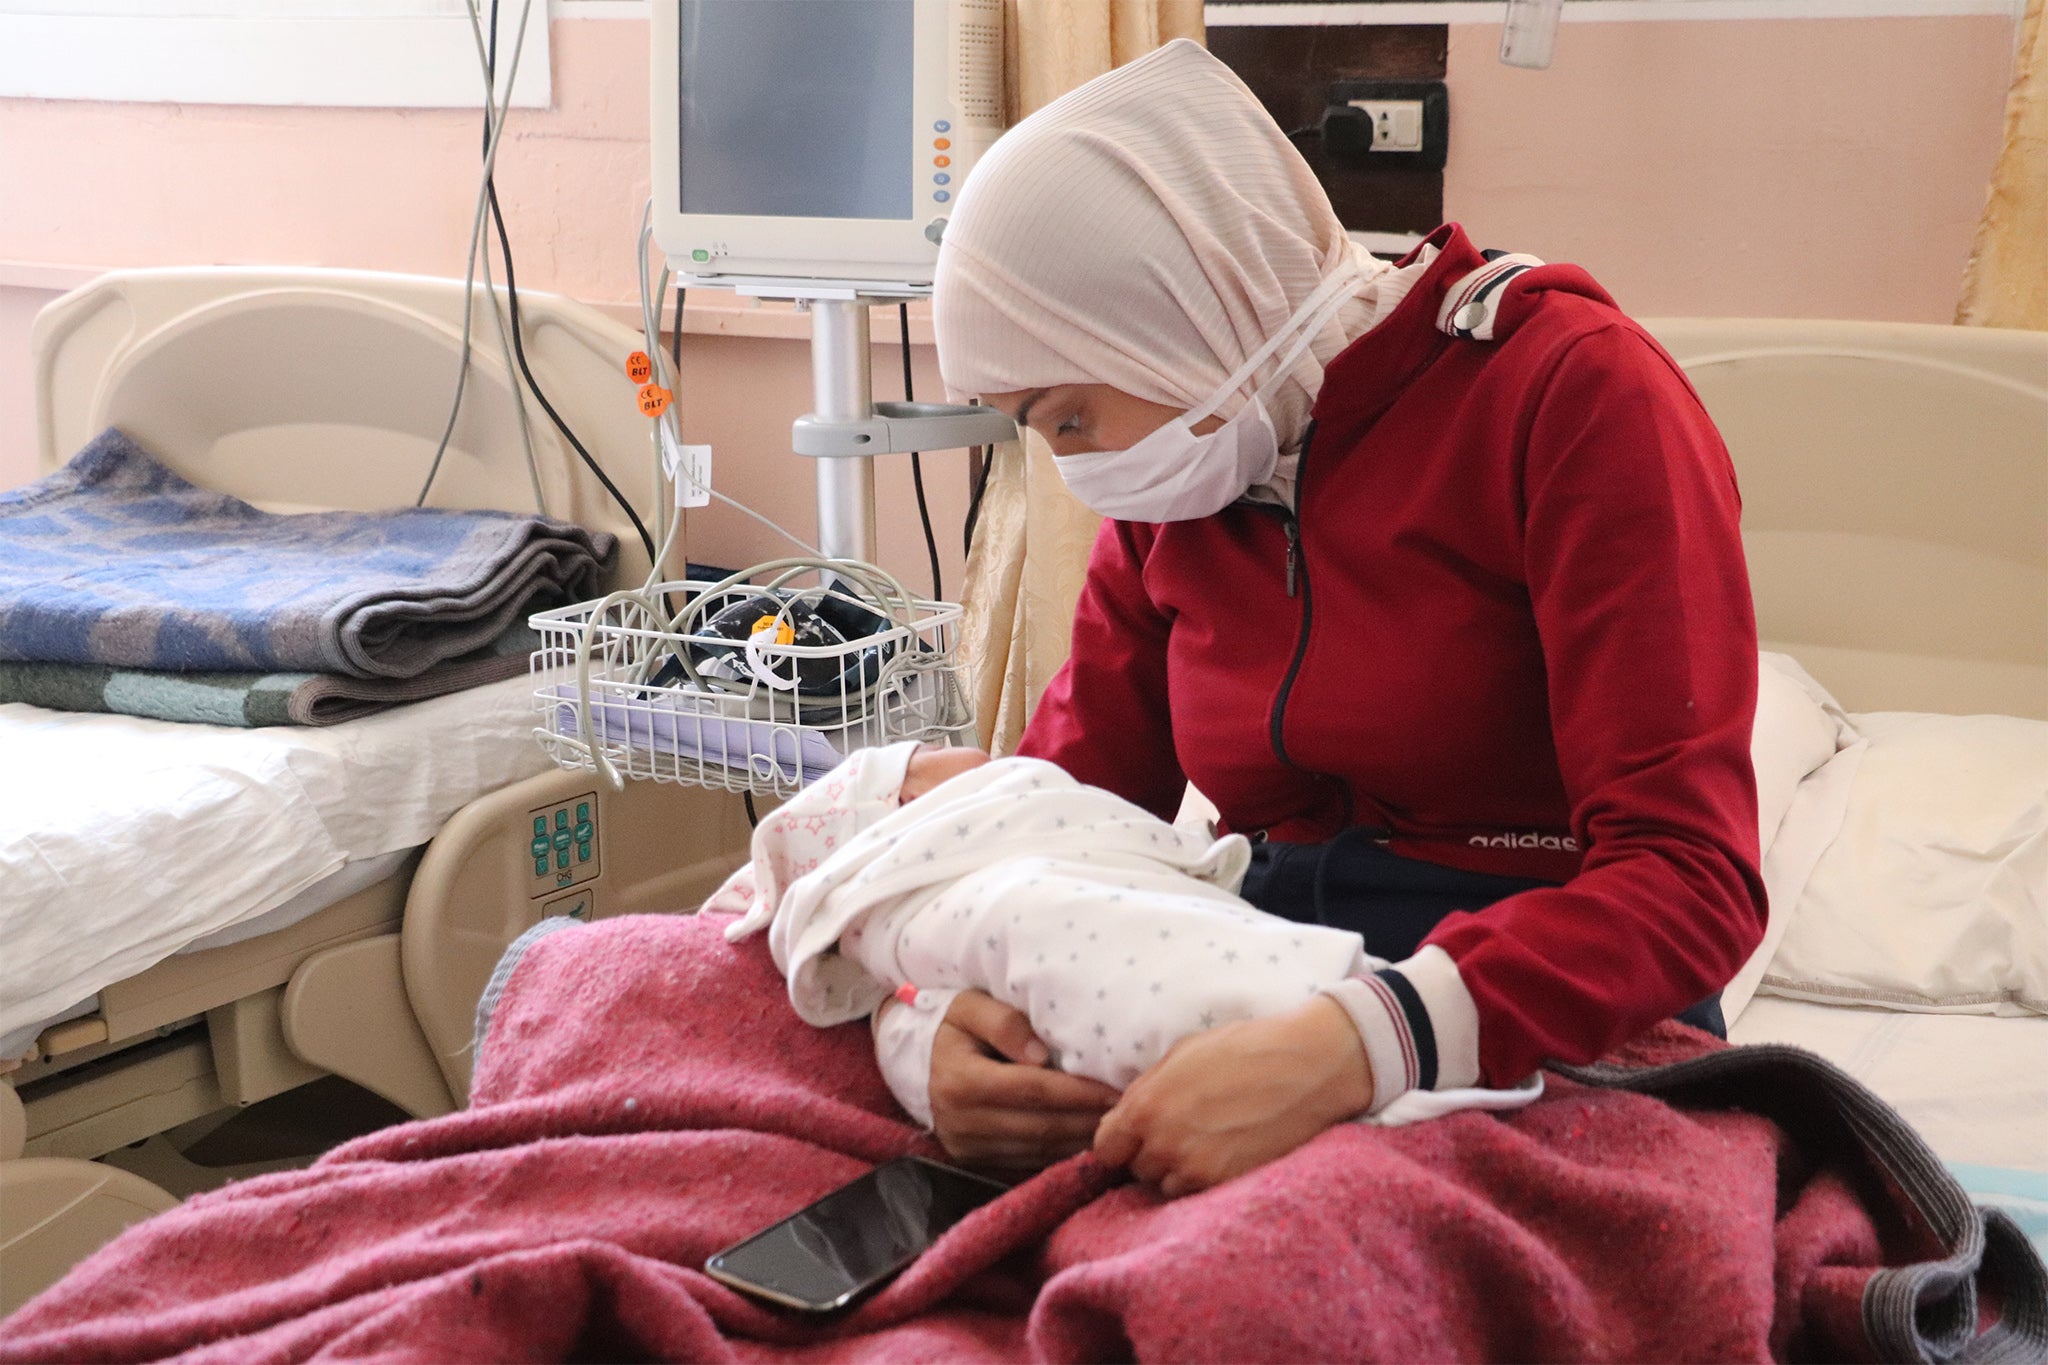 Abeer is the mother of a newborn daughter, born in an ActionAid-funded hospital in northwest Syria